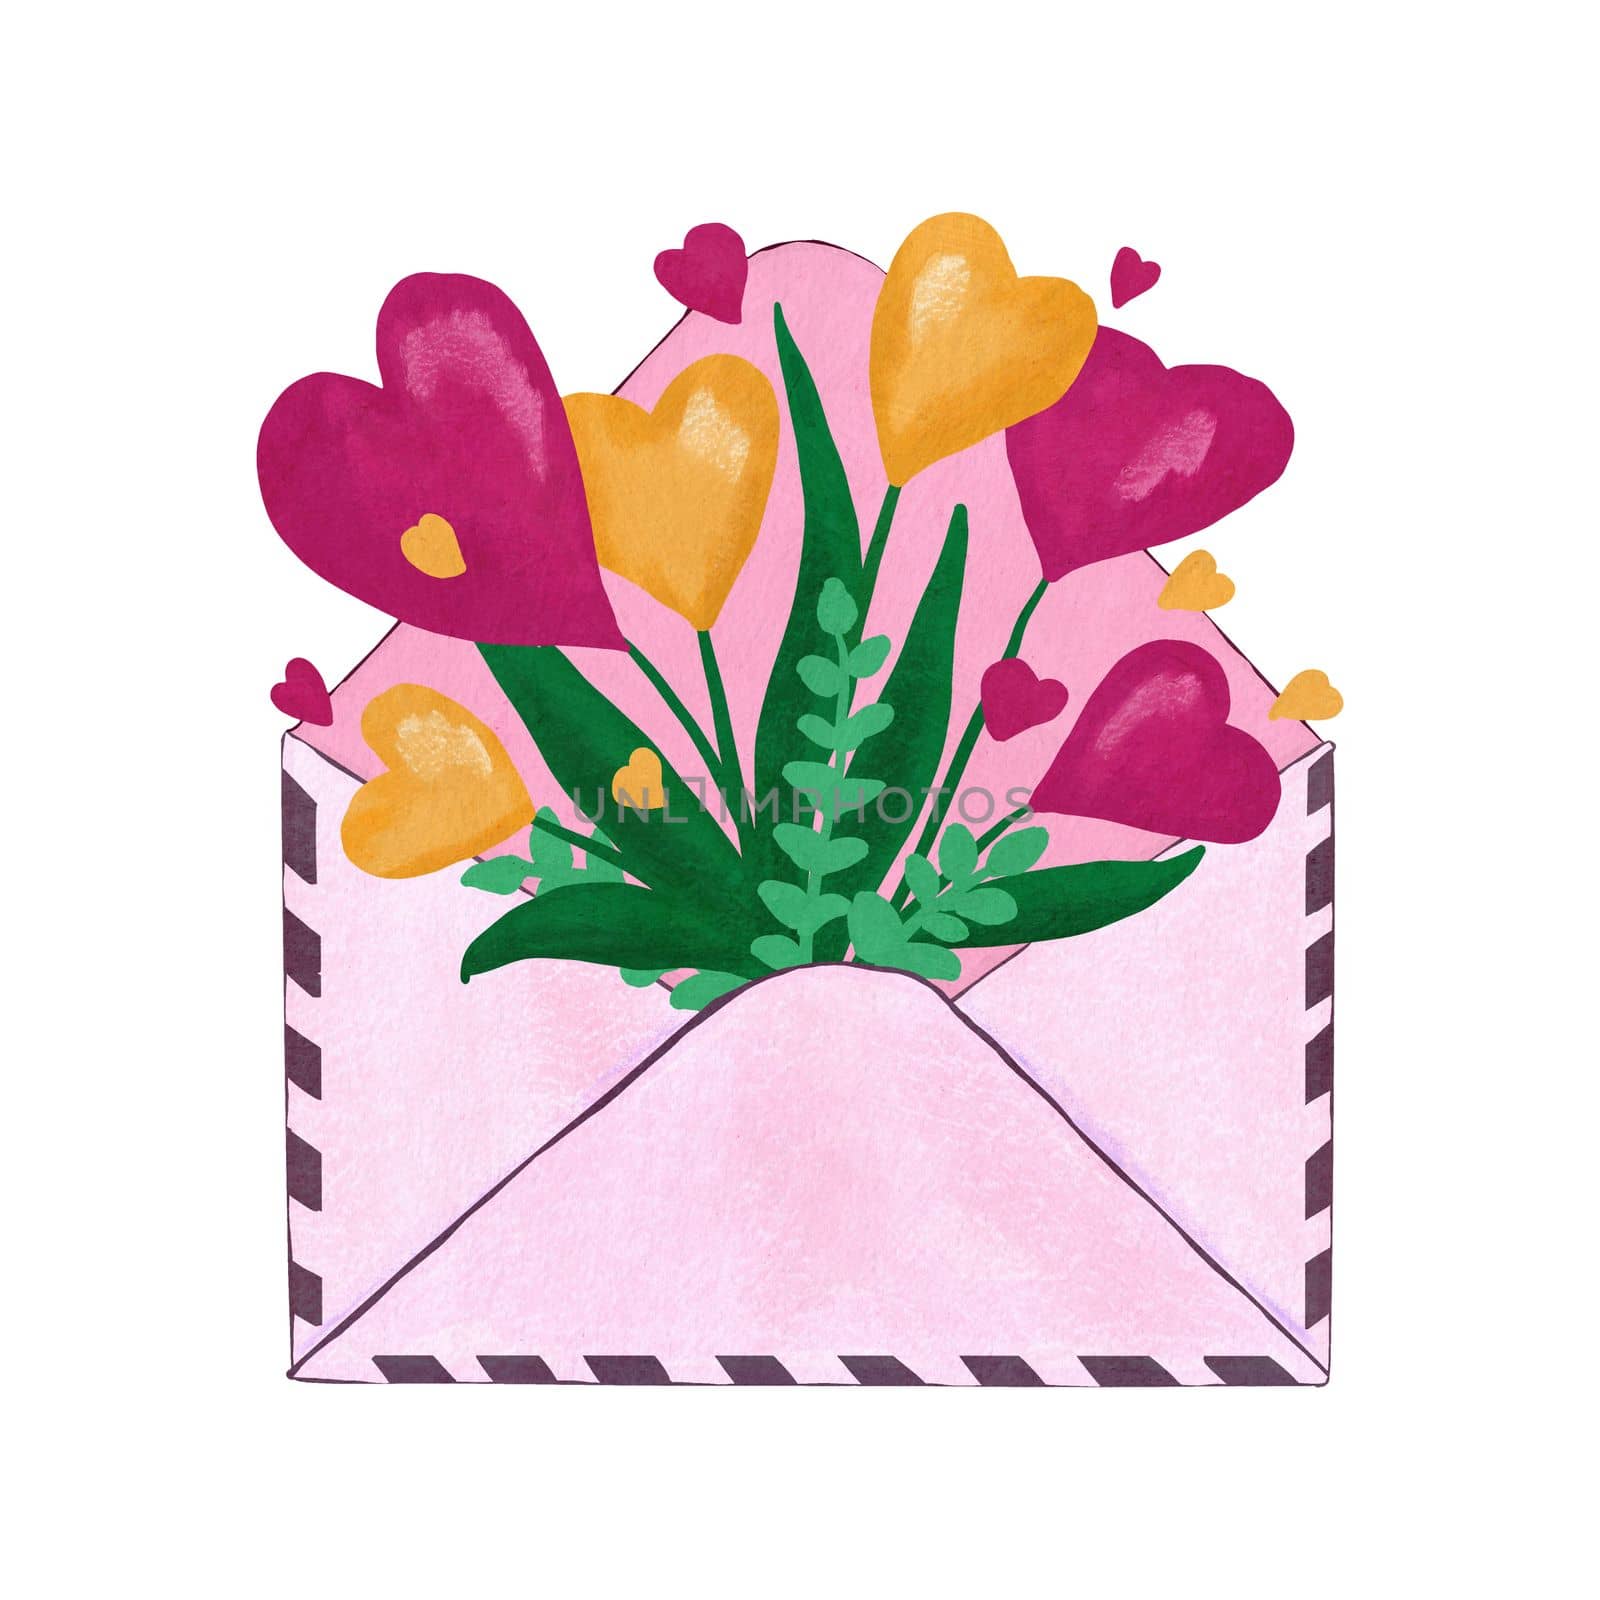 Hand drawn illustration of open letter envelope mailing list, sending business information invitation card. St valentine day hearts red pink yellow thank you card, cute floral design green leaves . by Lagmar